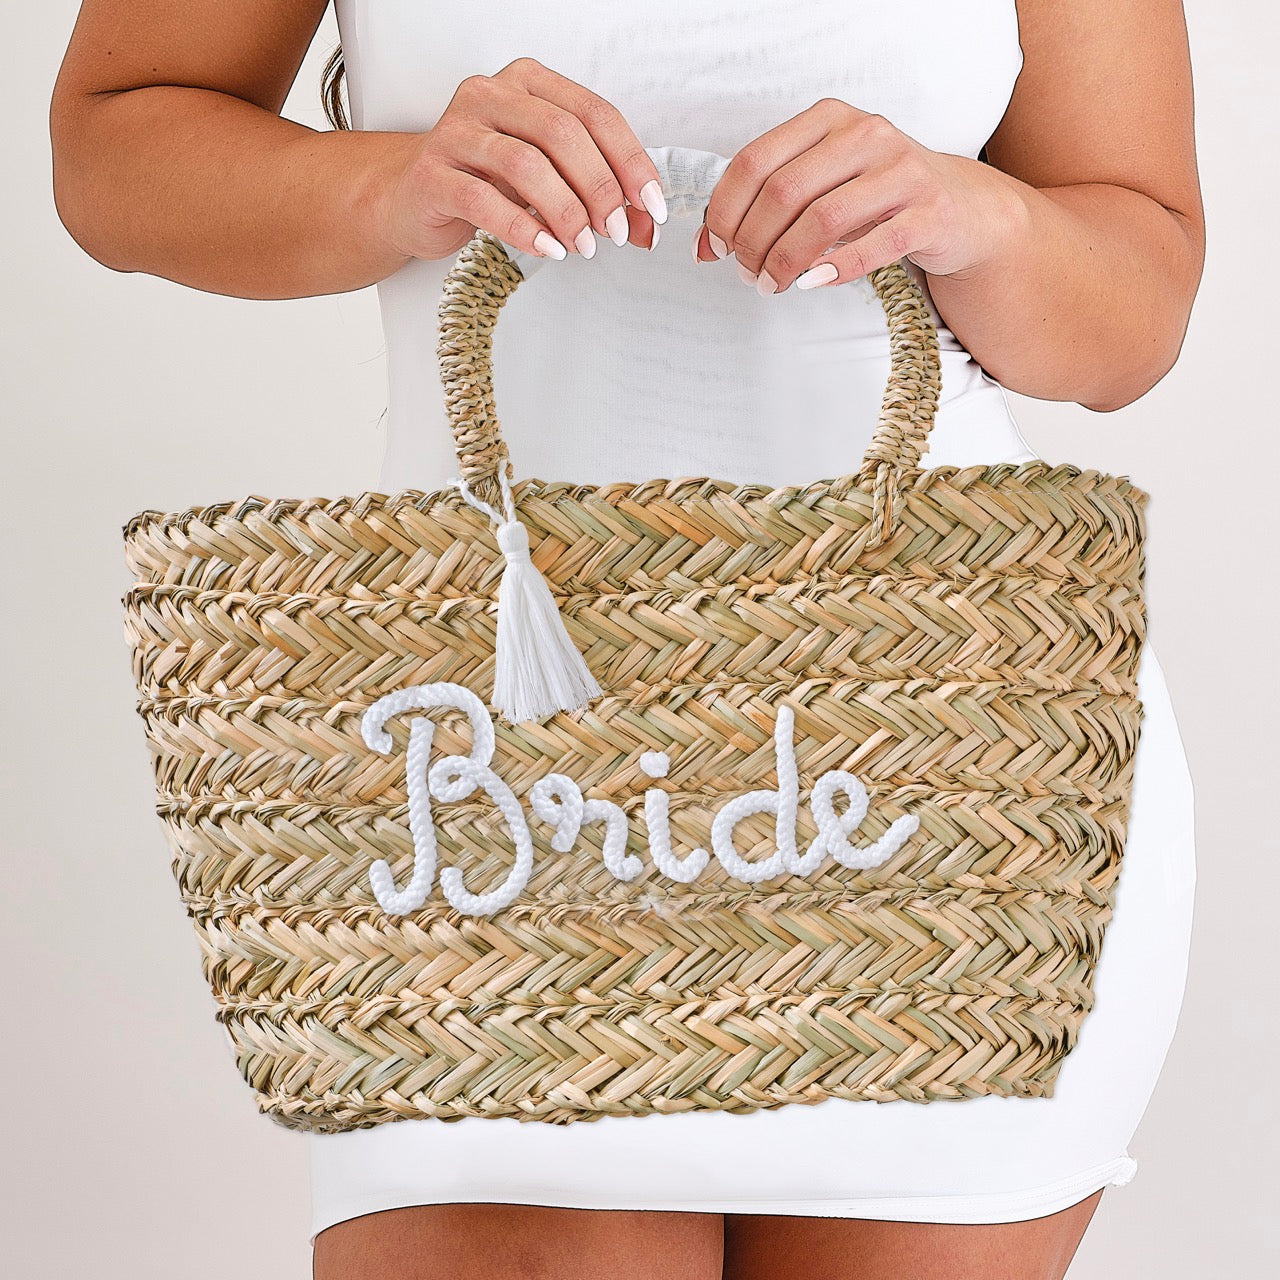 Bride To Be Bags